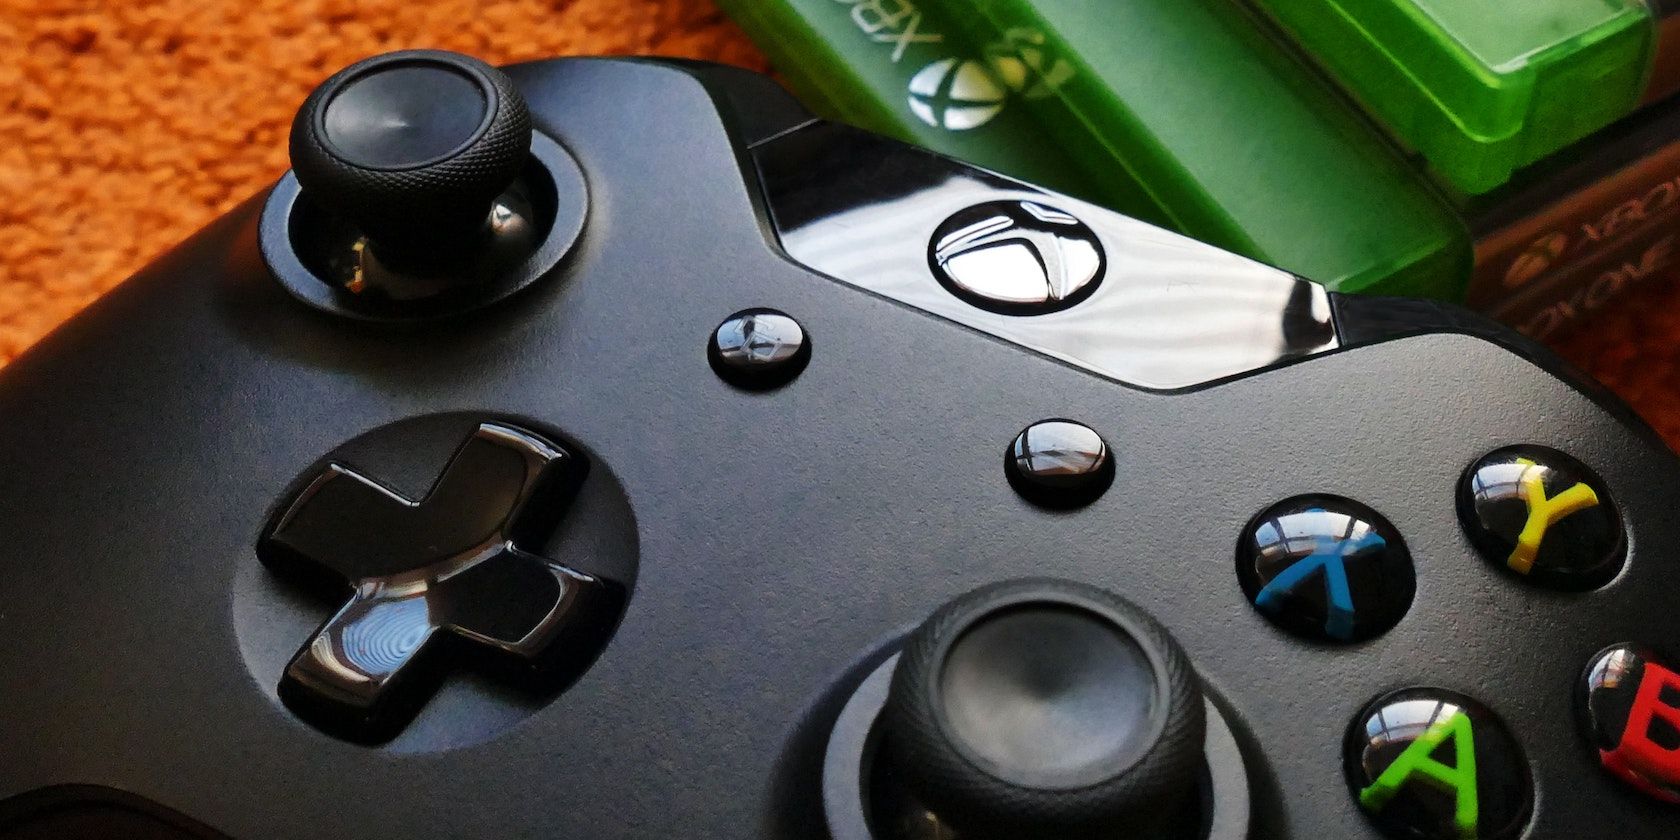 An Xbox controller with Xbox One games